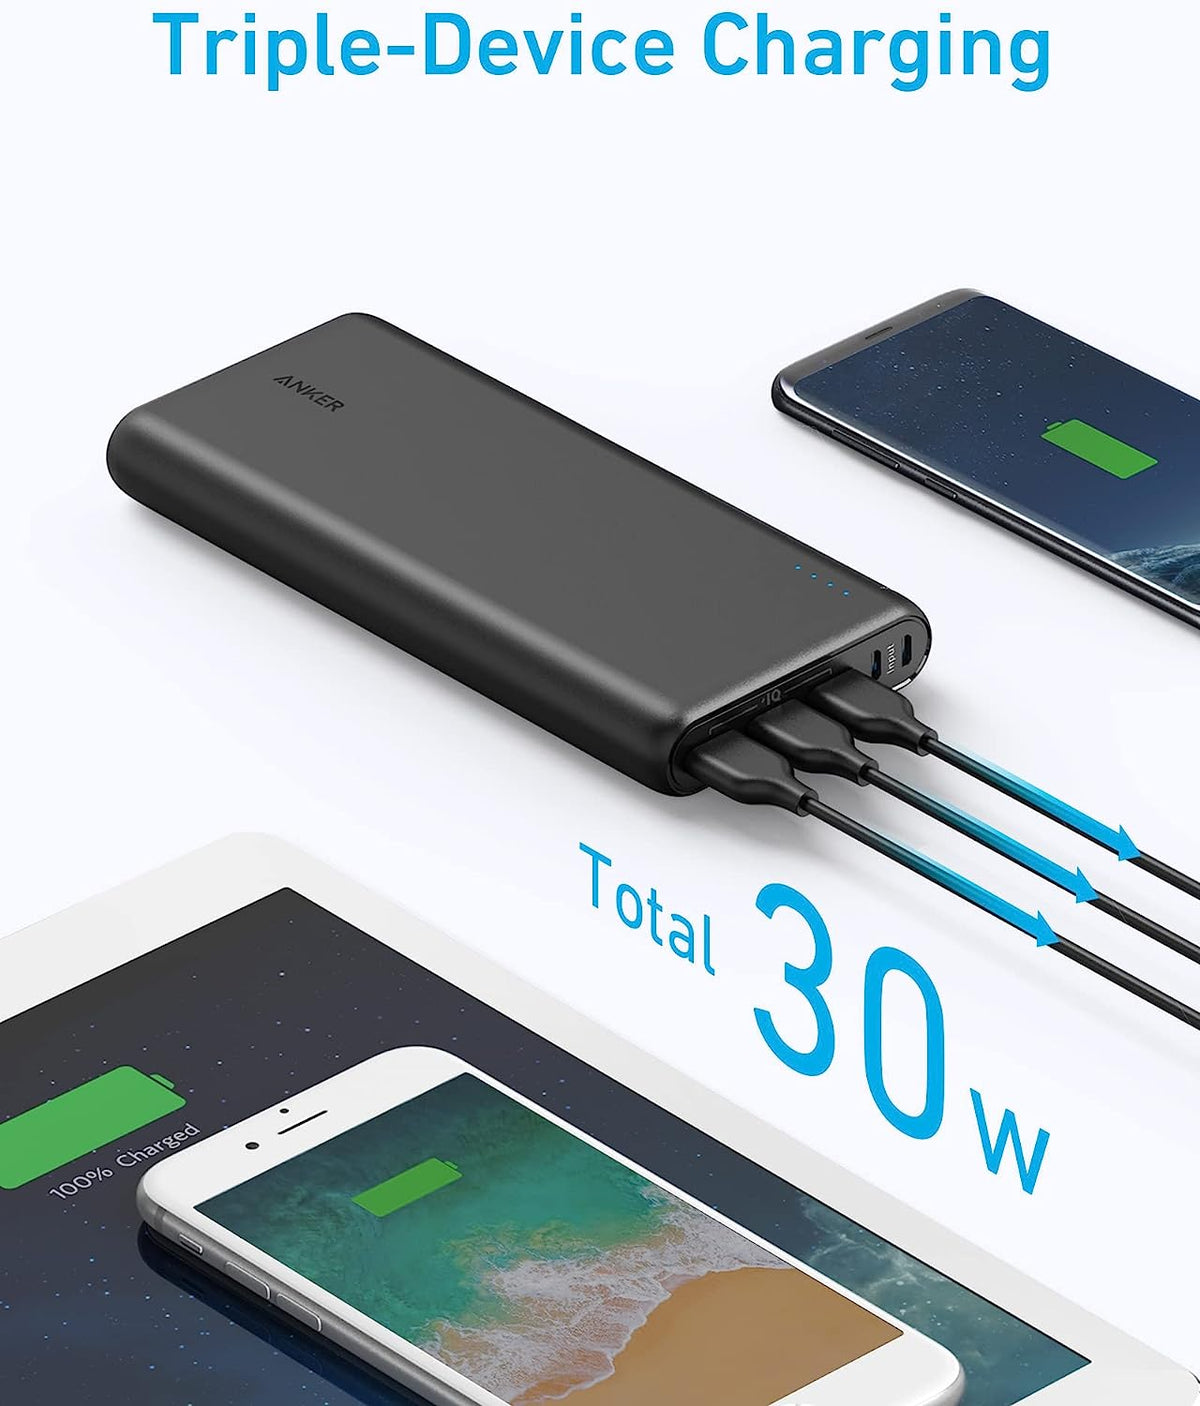 Anker 337 Power Bank (PowerCore 26K) Portable Charger, 26800mAh External Battery with Dual Input Port and Double-Speed Recharging